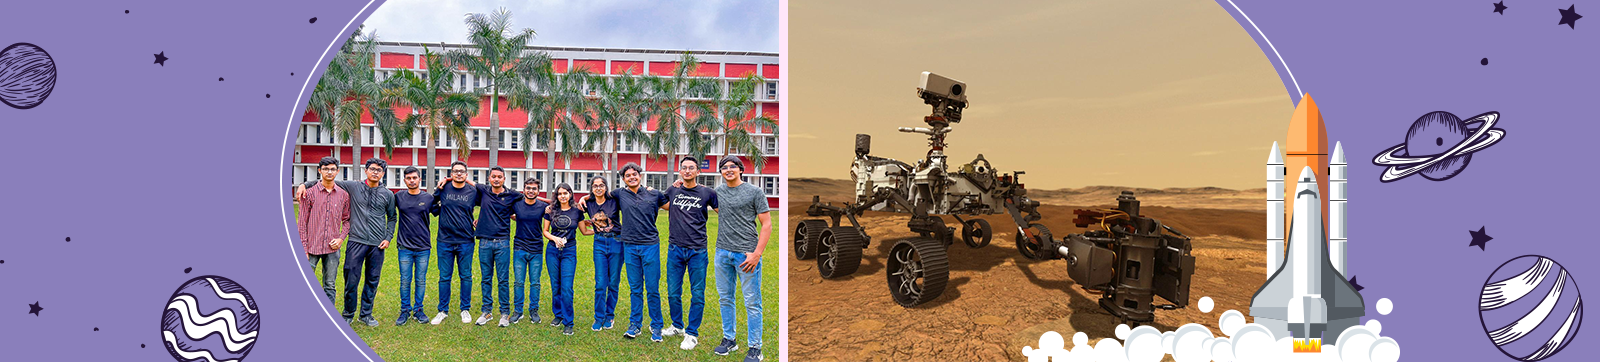 PEC team shortlisted for NASA rover challenge